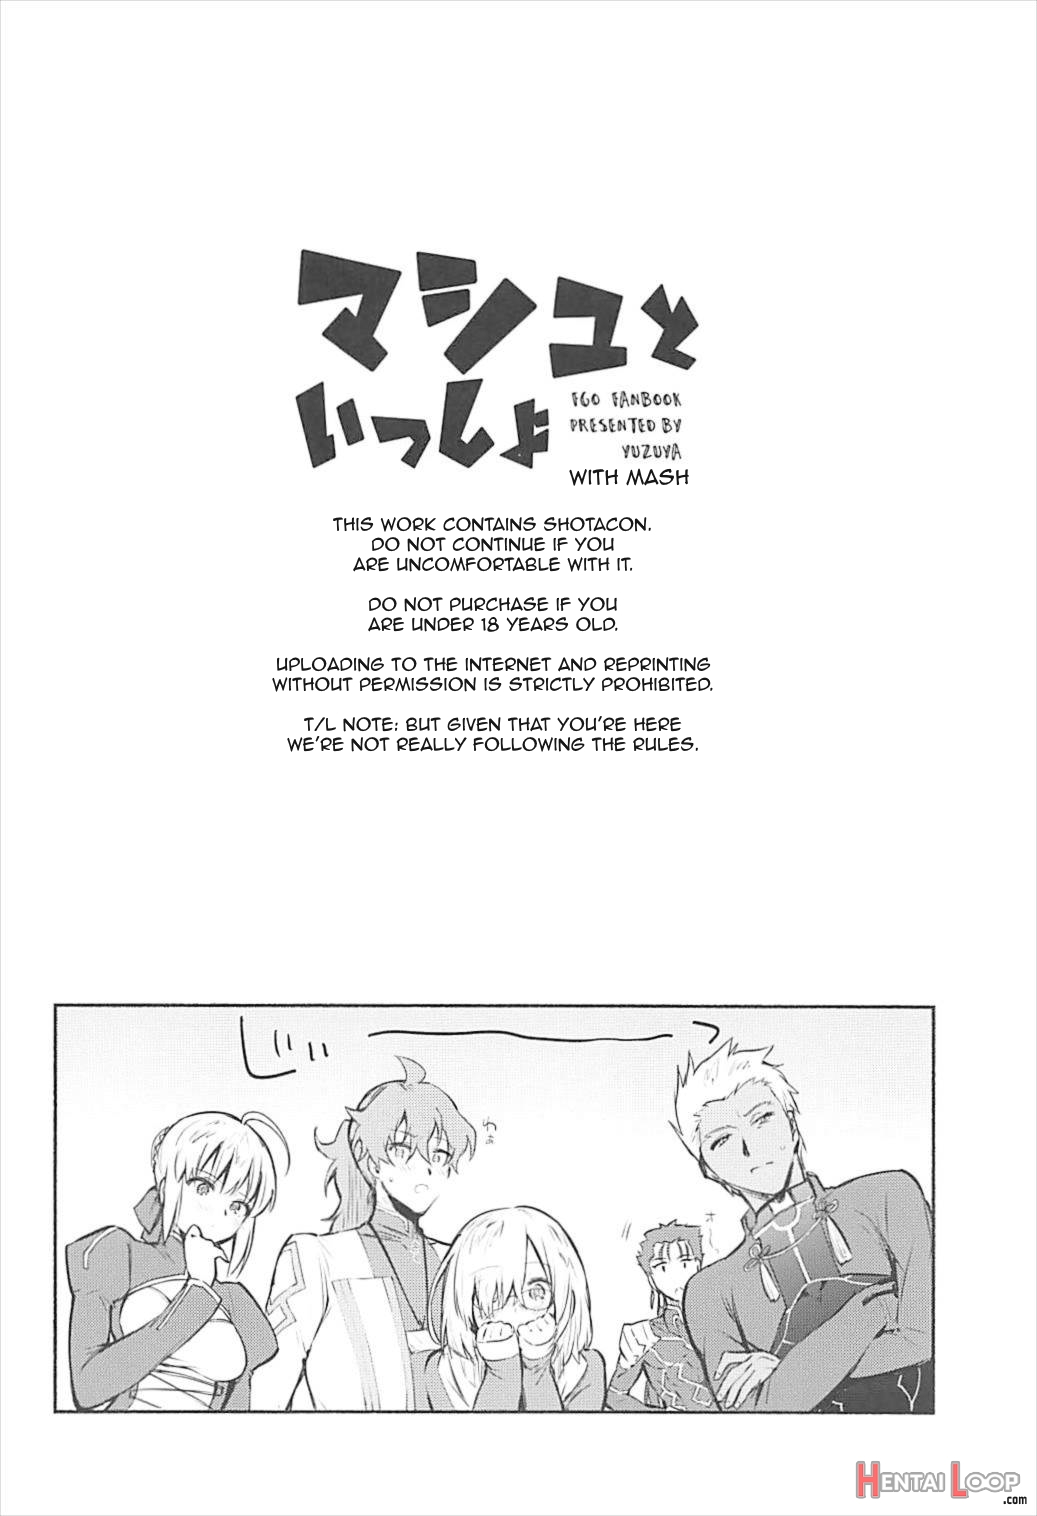 With Mash page 3